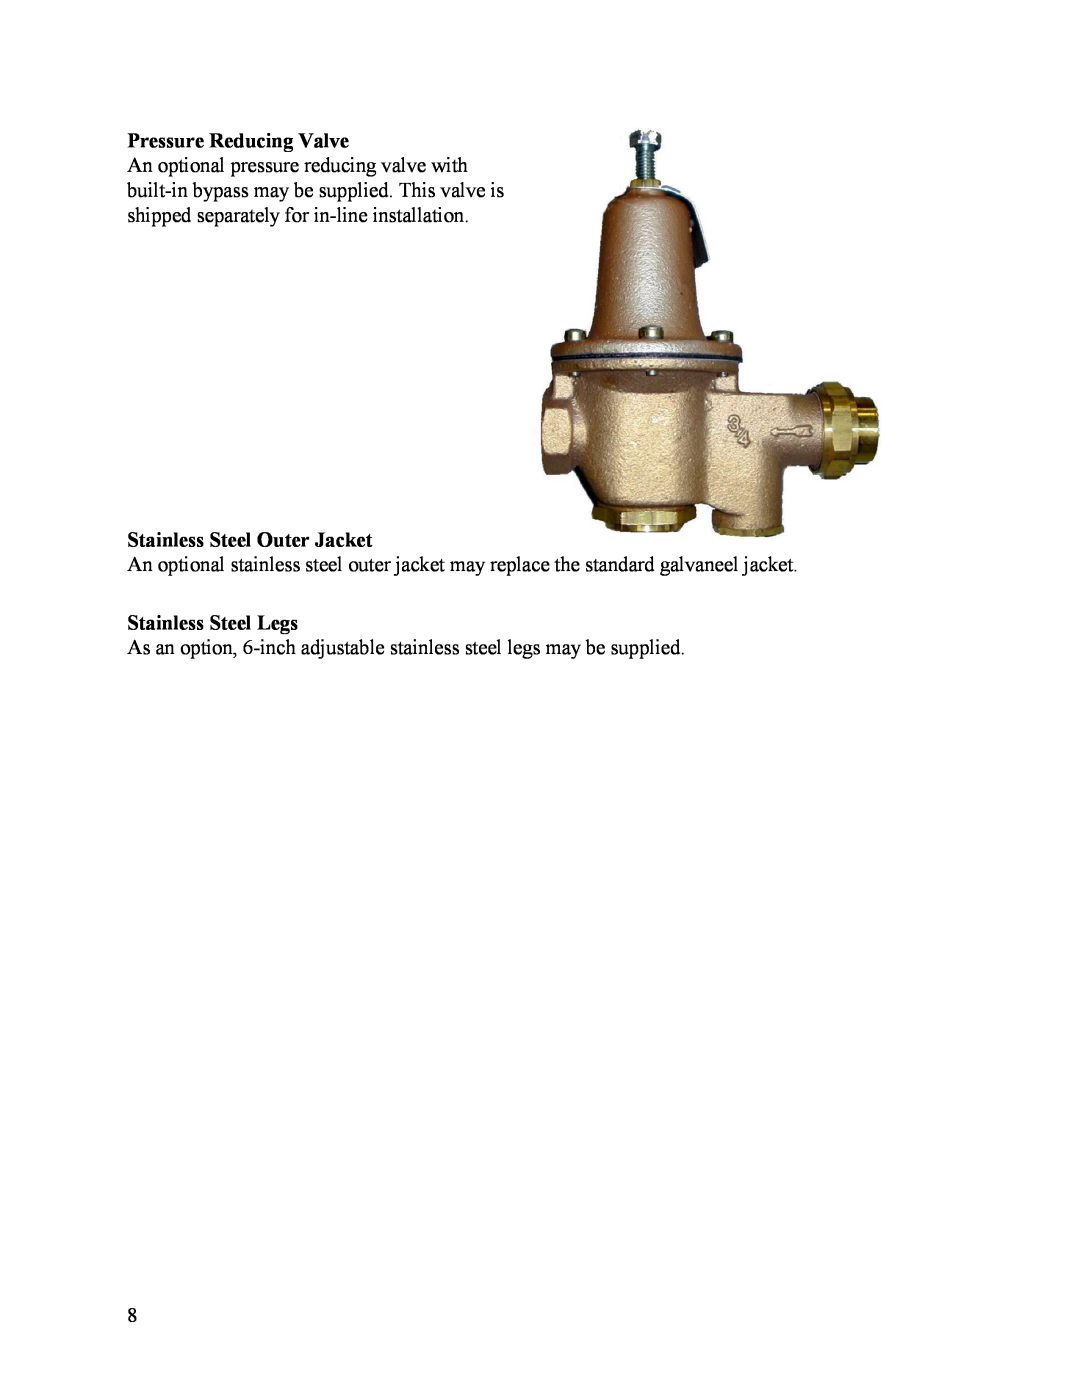 Hubbell Electric Heater Company A manual Pressure Reducing Valve, Stainless Steel Outer Jacket, Stainless Steel Legs 